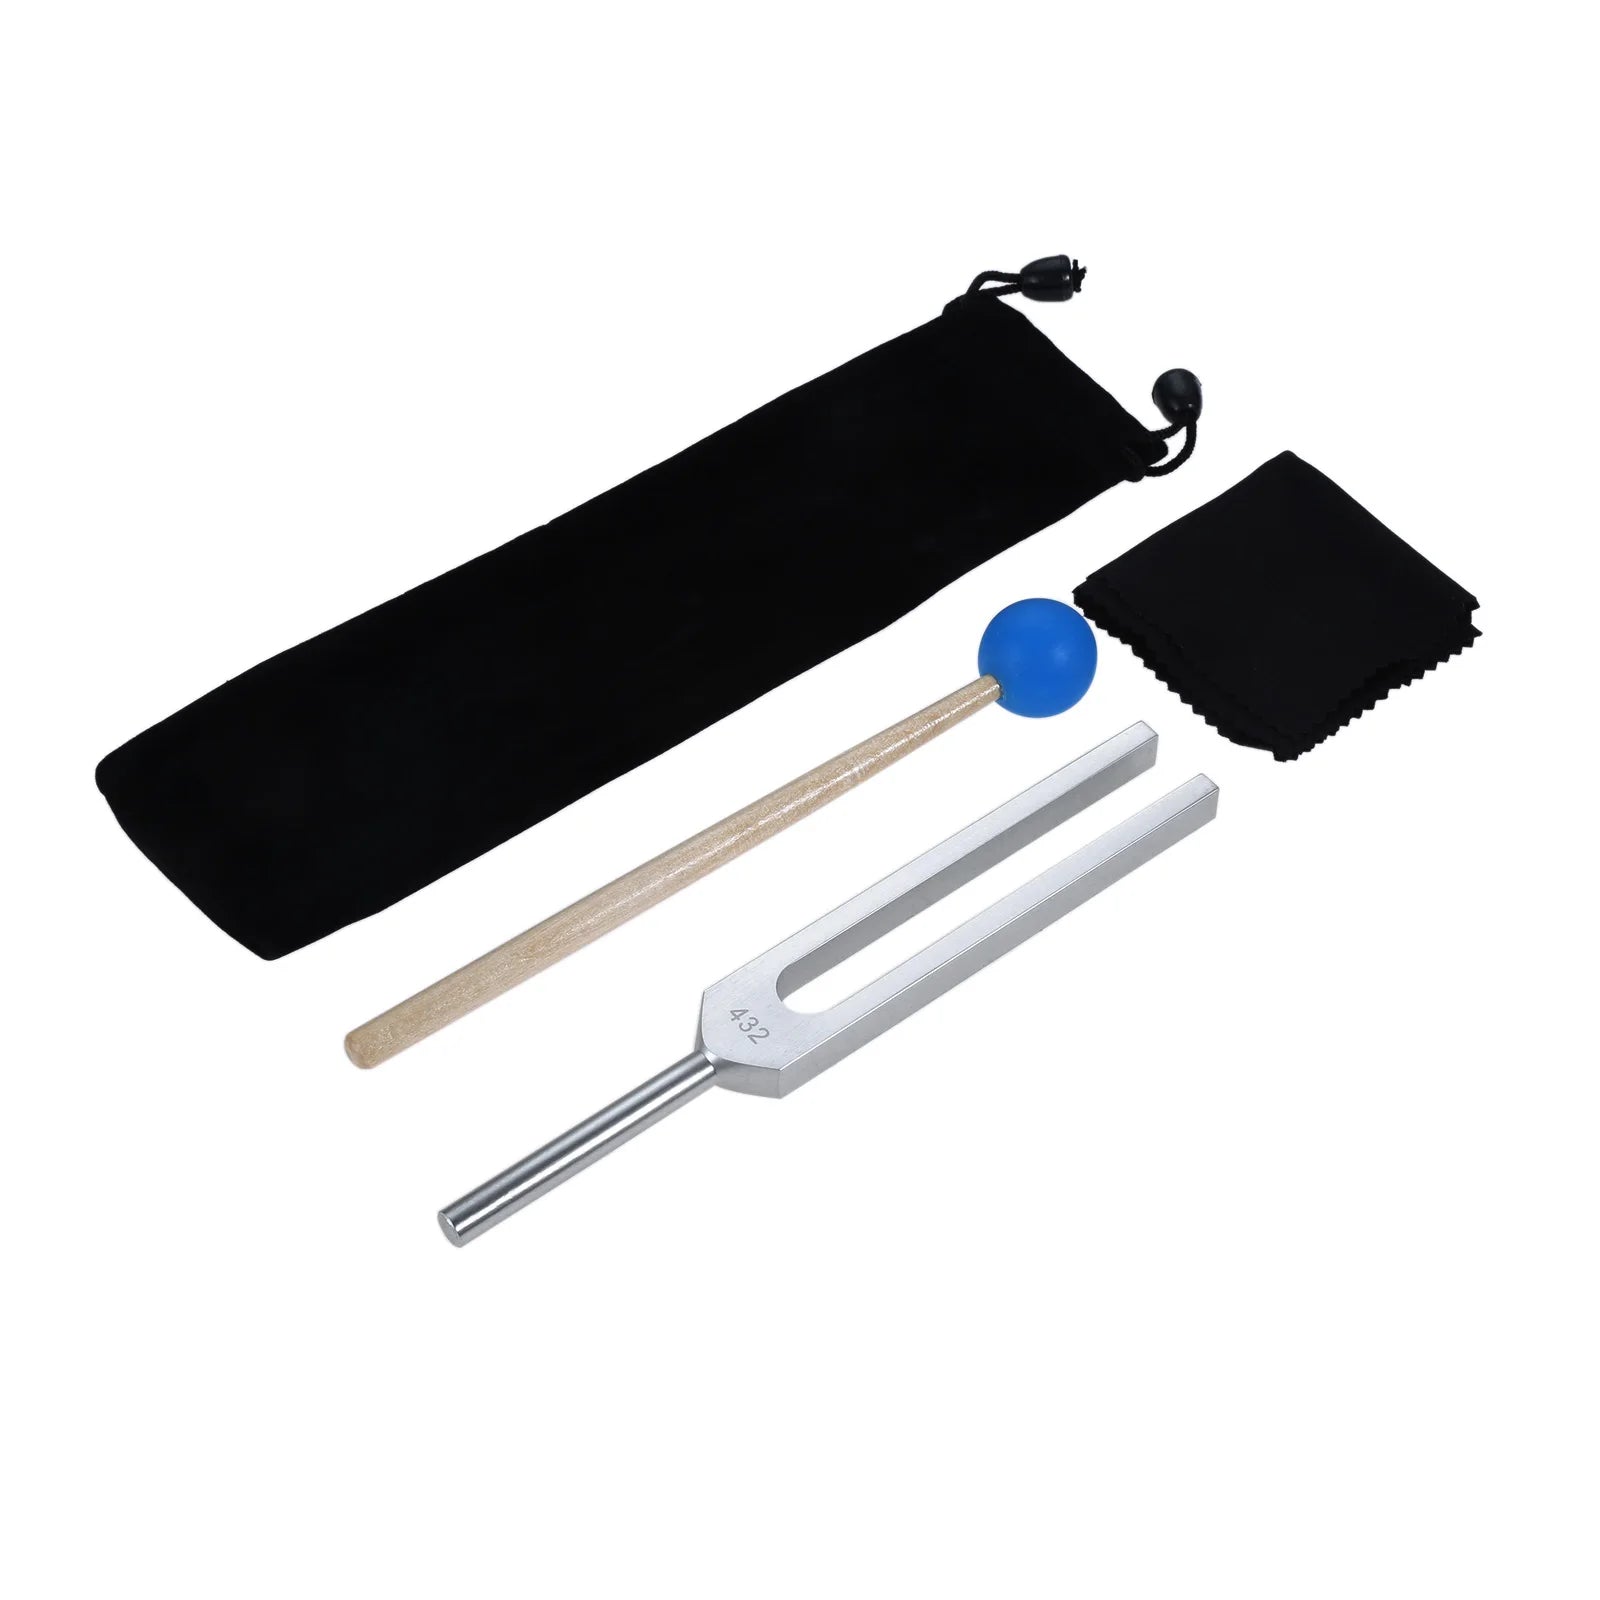 432 Hz Tuning Fork with Silicone Hammer, Bag, Cleaning Cloth - Cosmic Serenity Shop